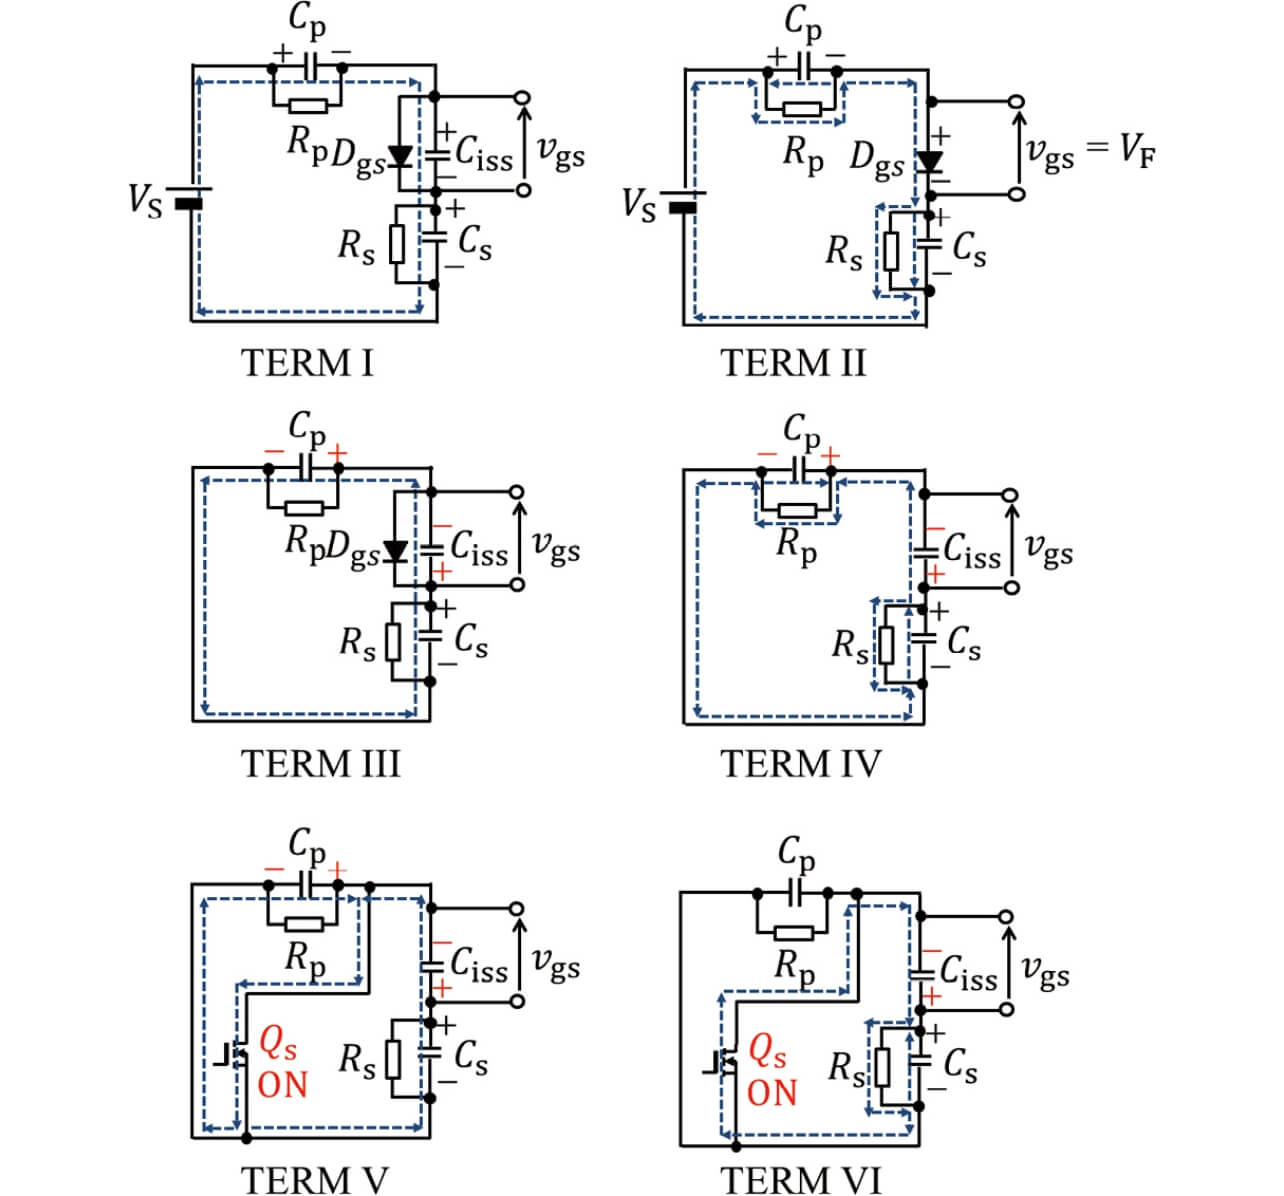 Fig. 7 Equivalent circuit of proposed gate drive circuit